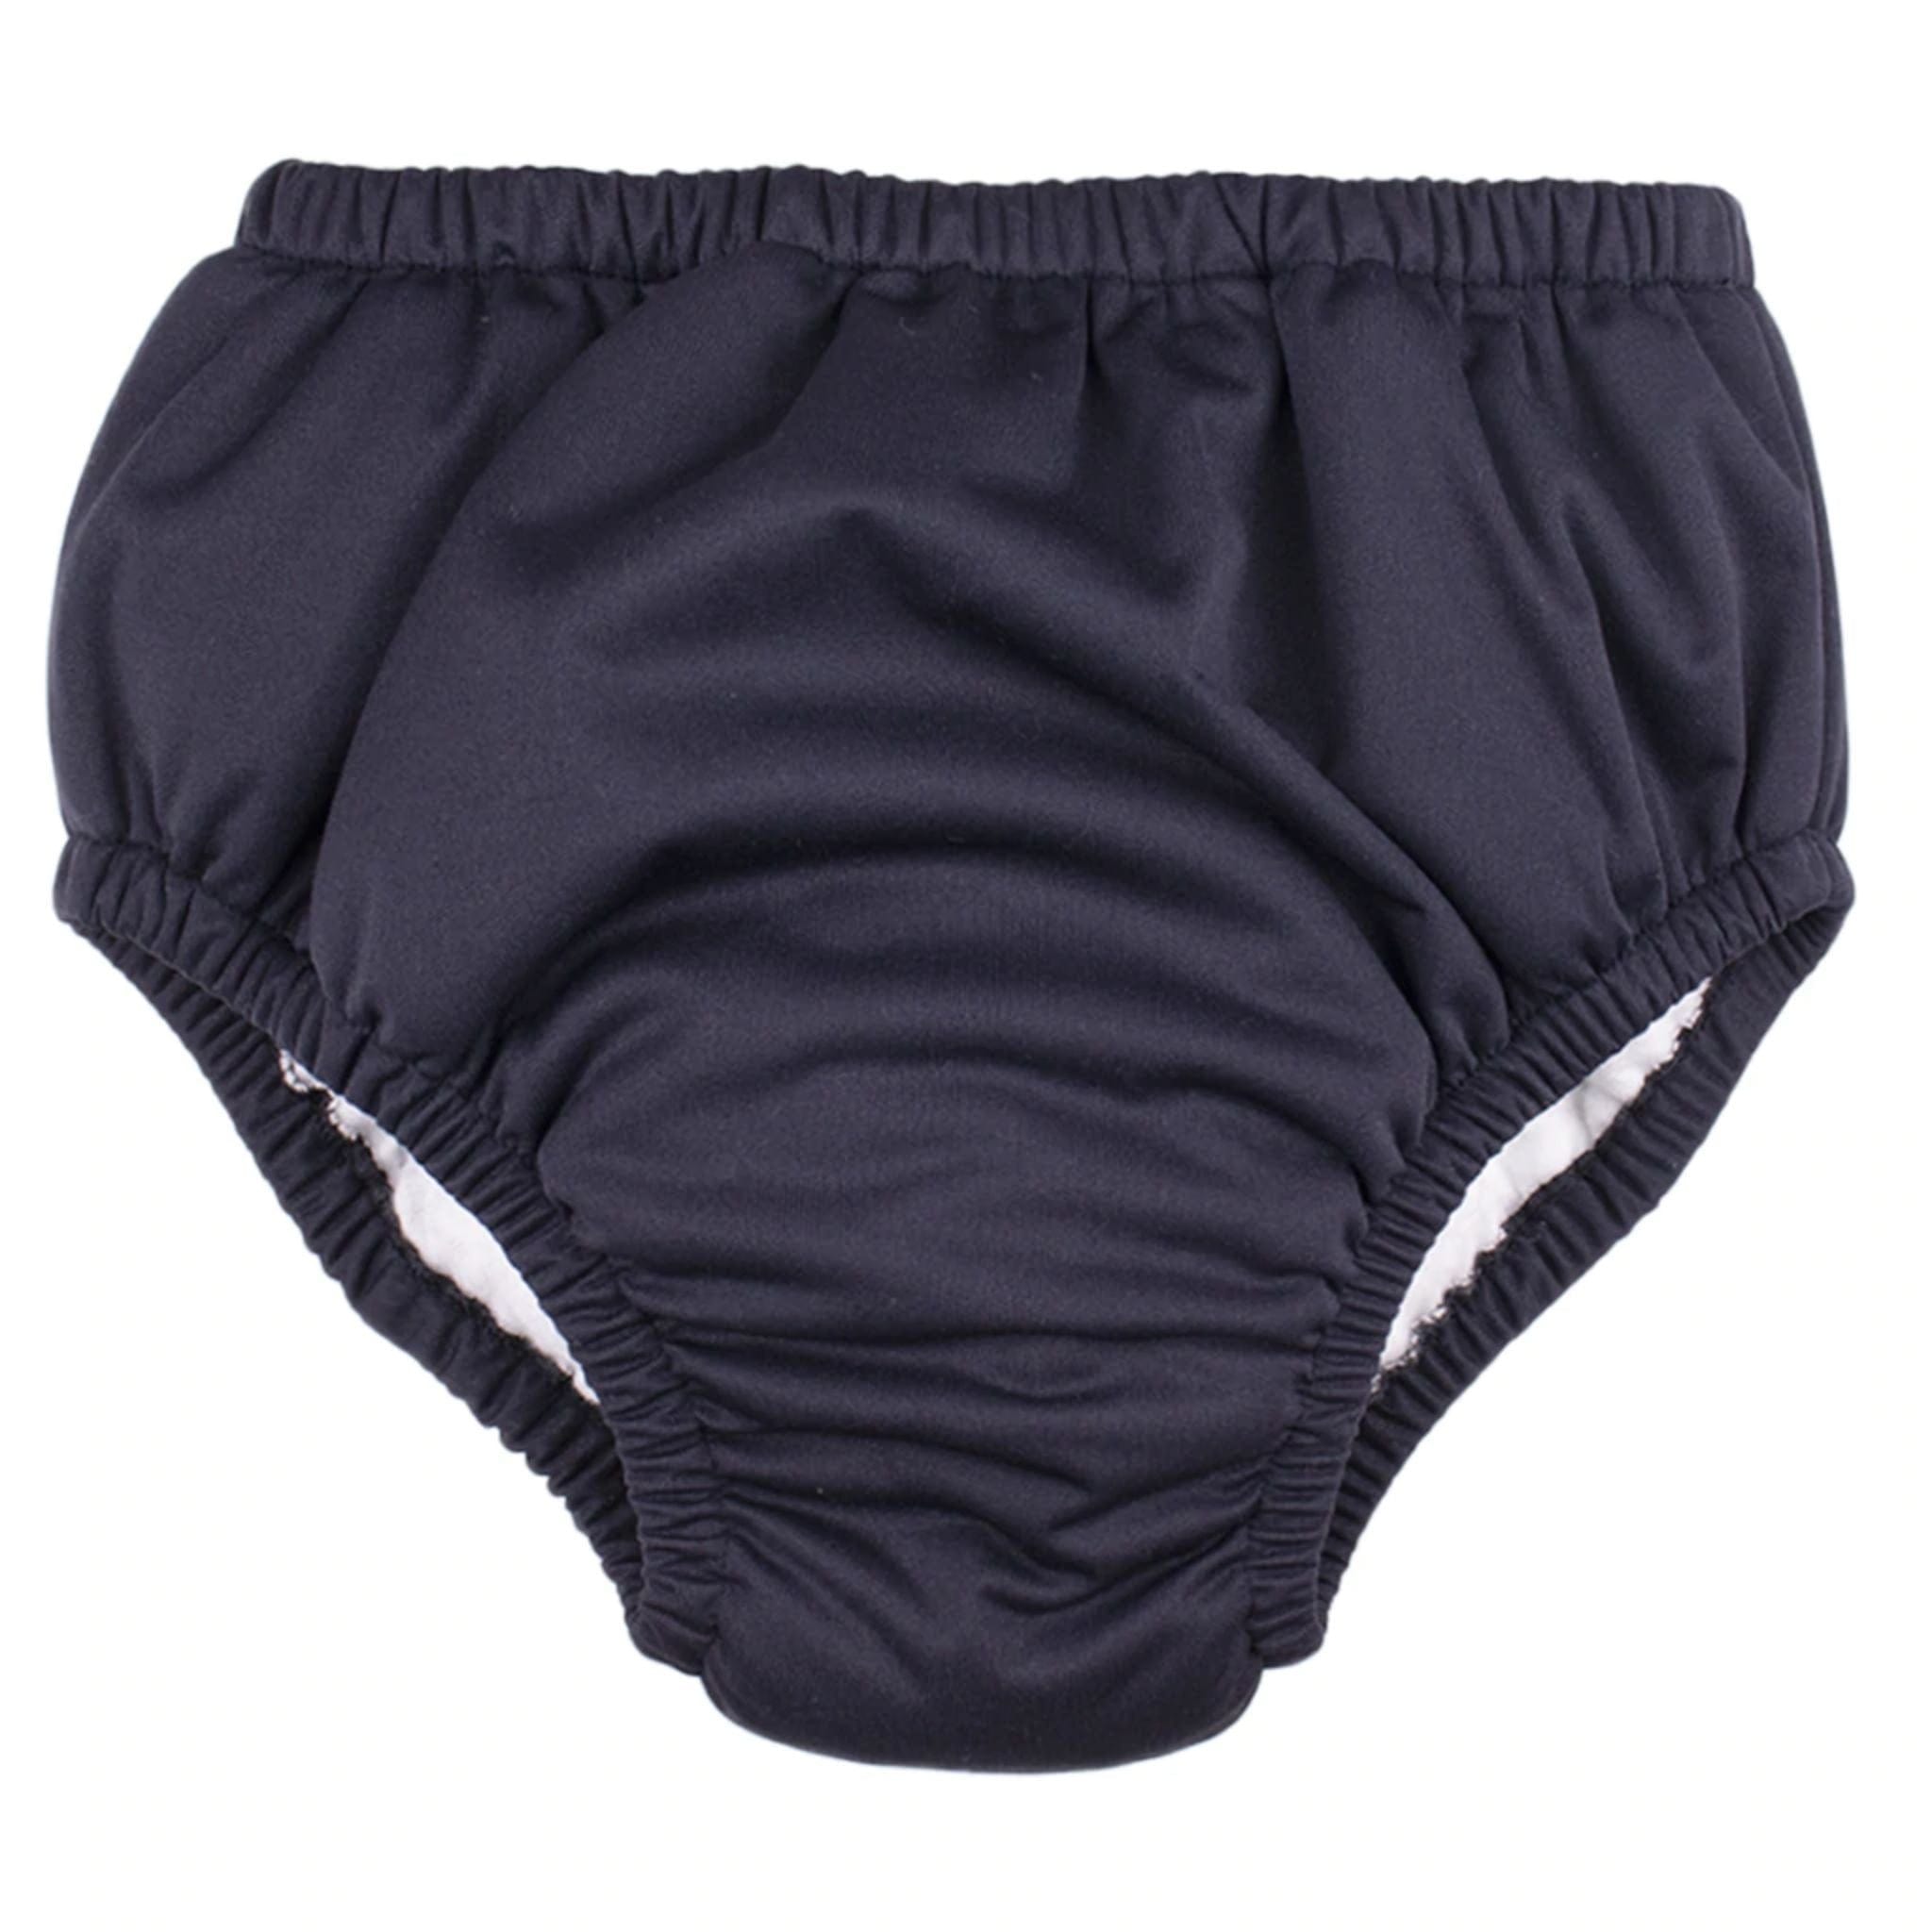 Buy Depend Adult Pullup Pants for Men  Comfort Protect Underwear  LargeExtra Large Online at Best Price of Rs 599  bigbasket